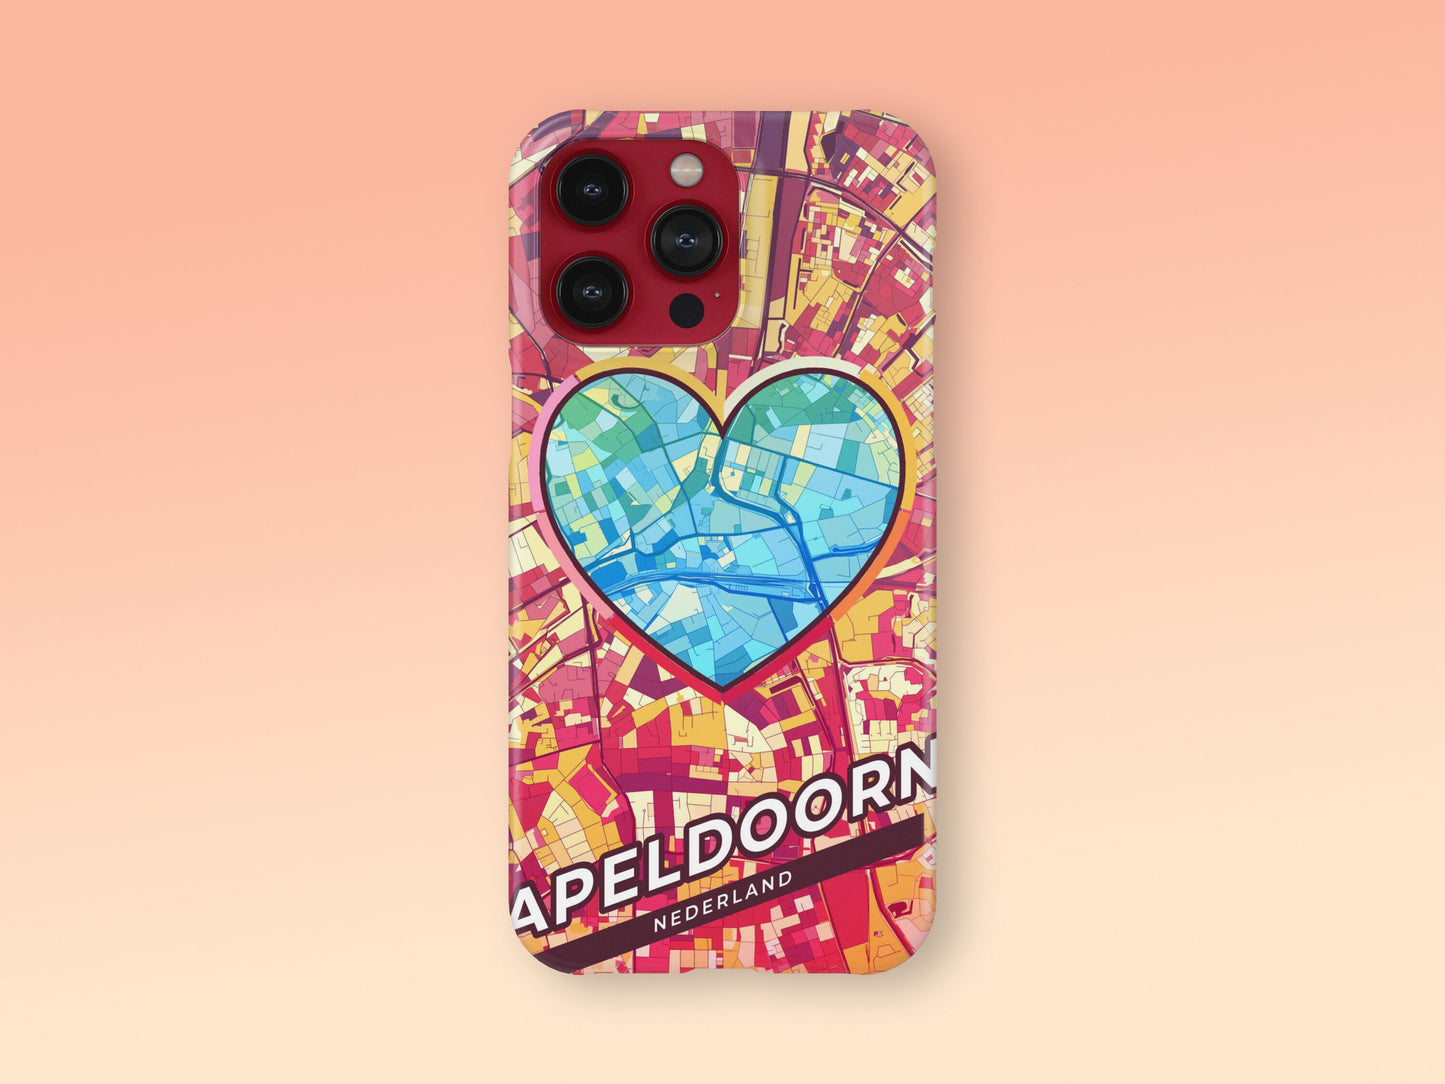 Apeldoorn Netherlands slim phone case with colorful icon. Birthday, wedding or housewarming gift. Couple match cases. 2